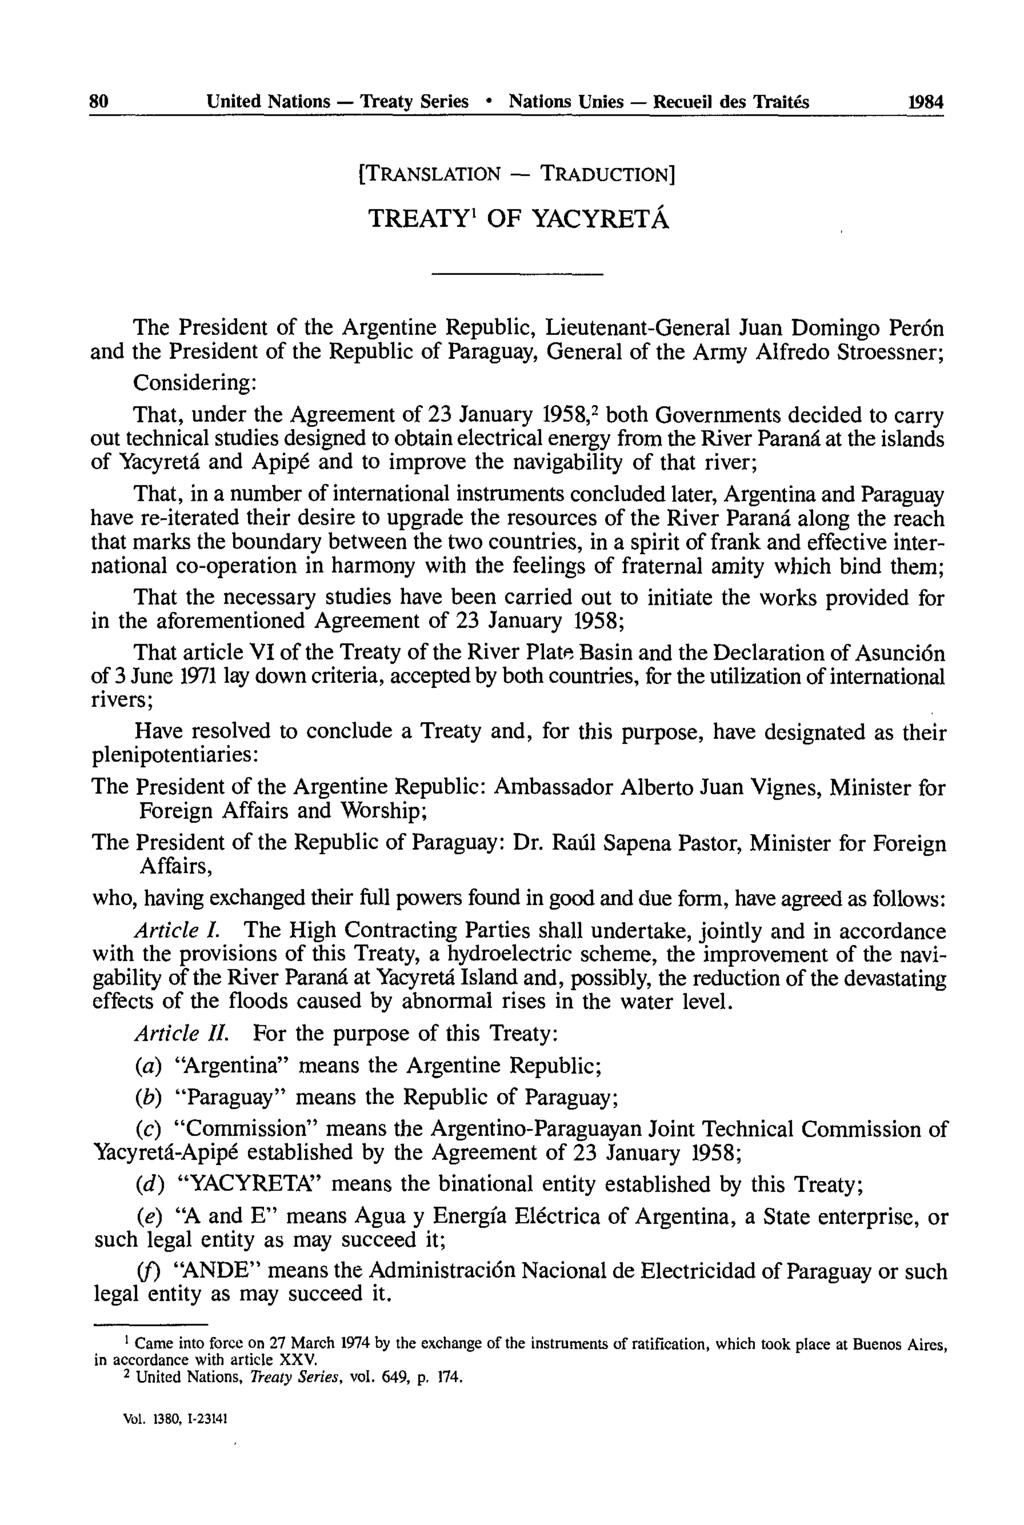 80 United Nations Treaty Series Nations Unies Recueil des Traités 1984 [TRANSLATION TRADUCTION] TREATY 1 OF YACYRET The President of the Argentine Republic, Lieutenant-G n ral Juan Domingo Per n and